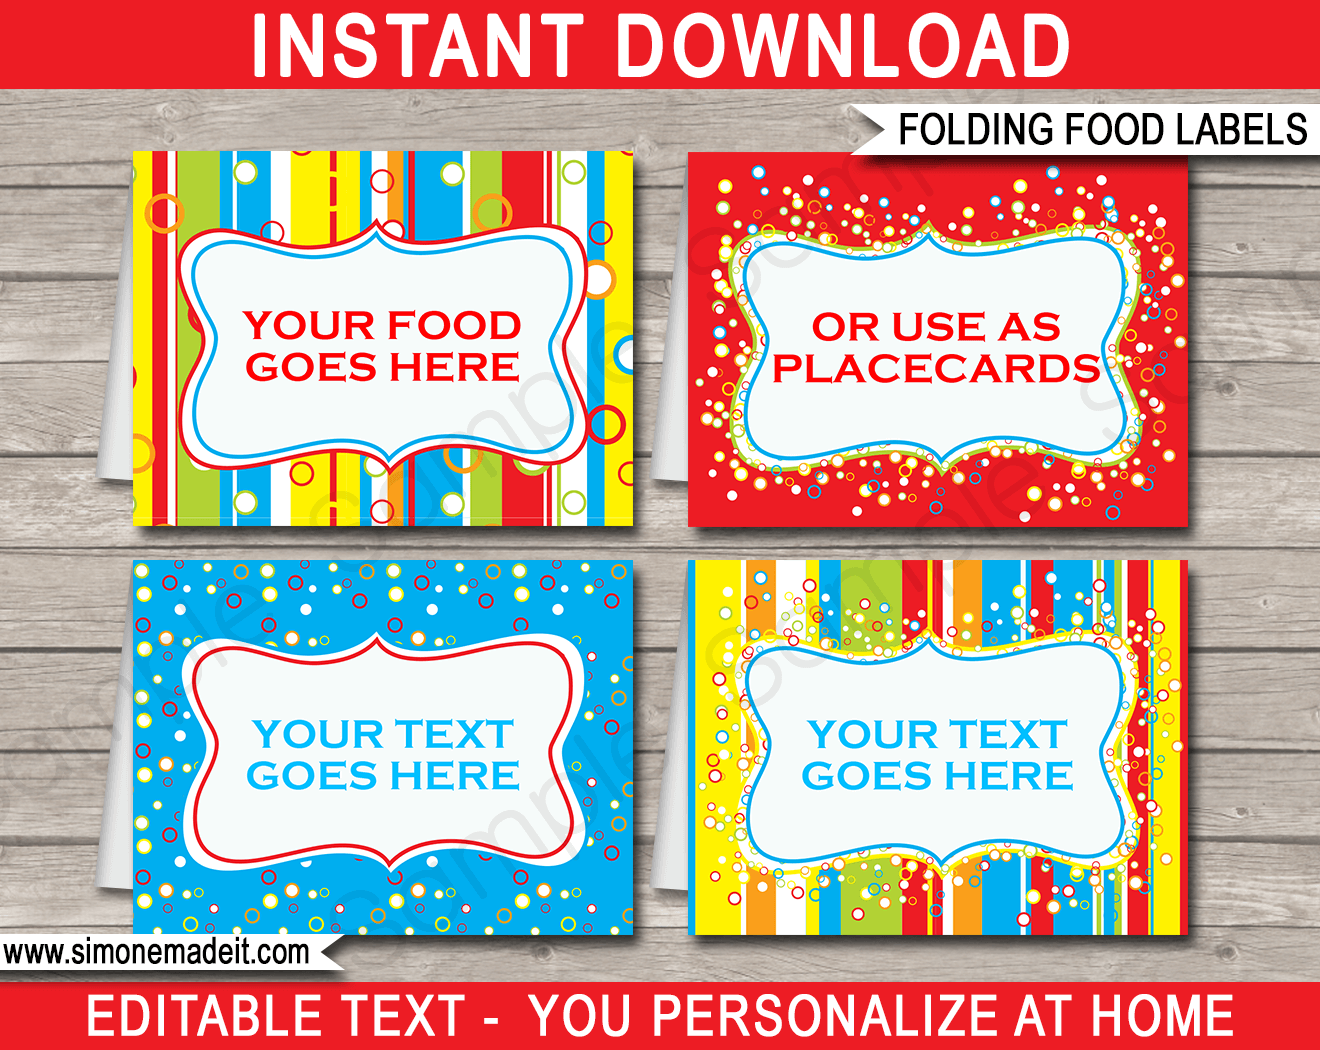 Printable Colorful Food Labels | Food Buffet Tags | Place Cards | Birthday Party | Editable DIY Template | $3.00 INSTANT DOWNLOAD via SIMONEmadeit.com